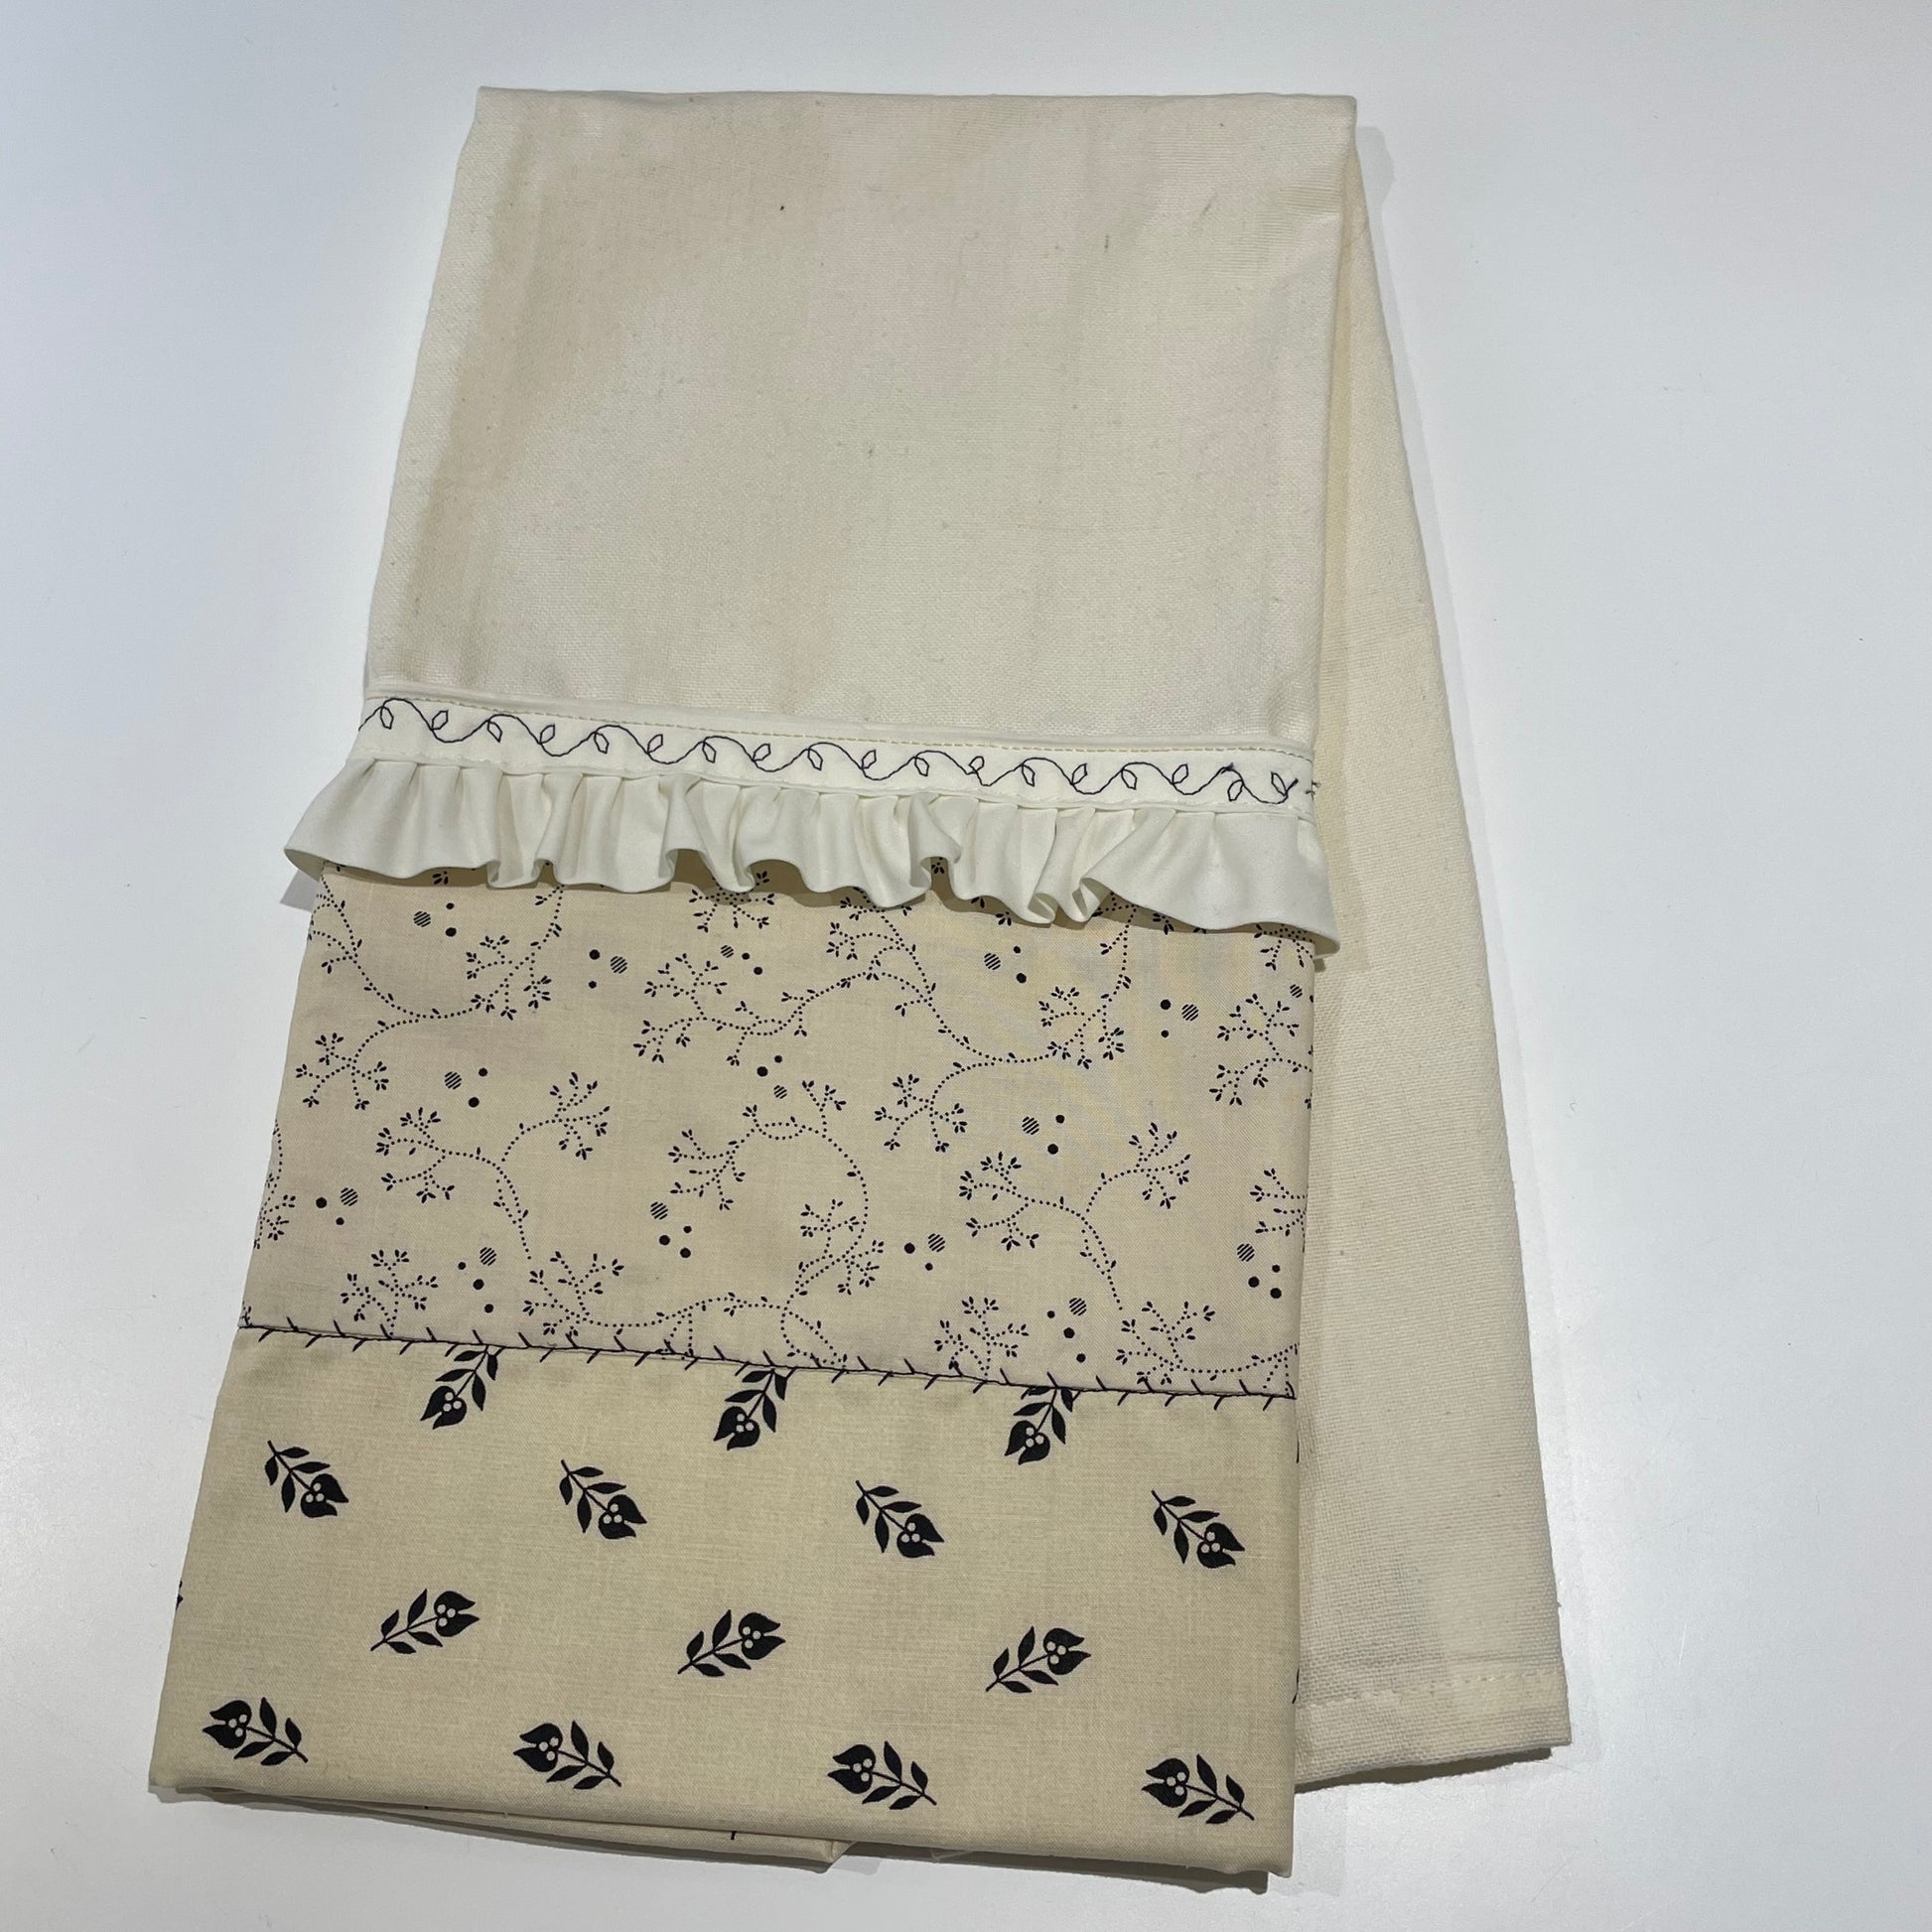 Handcrafted in Canada Farmhouse Style Dish Towel with black flowers on a beige cotton towel and embroidery details. Purchase this product or learn to make your own on the Home Stitchery Decor YouTube Channel. Part of a coordinating product line. 